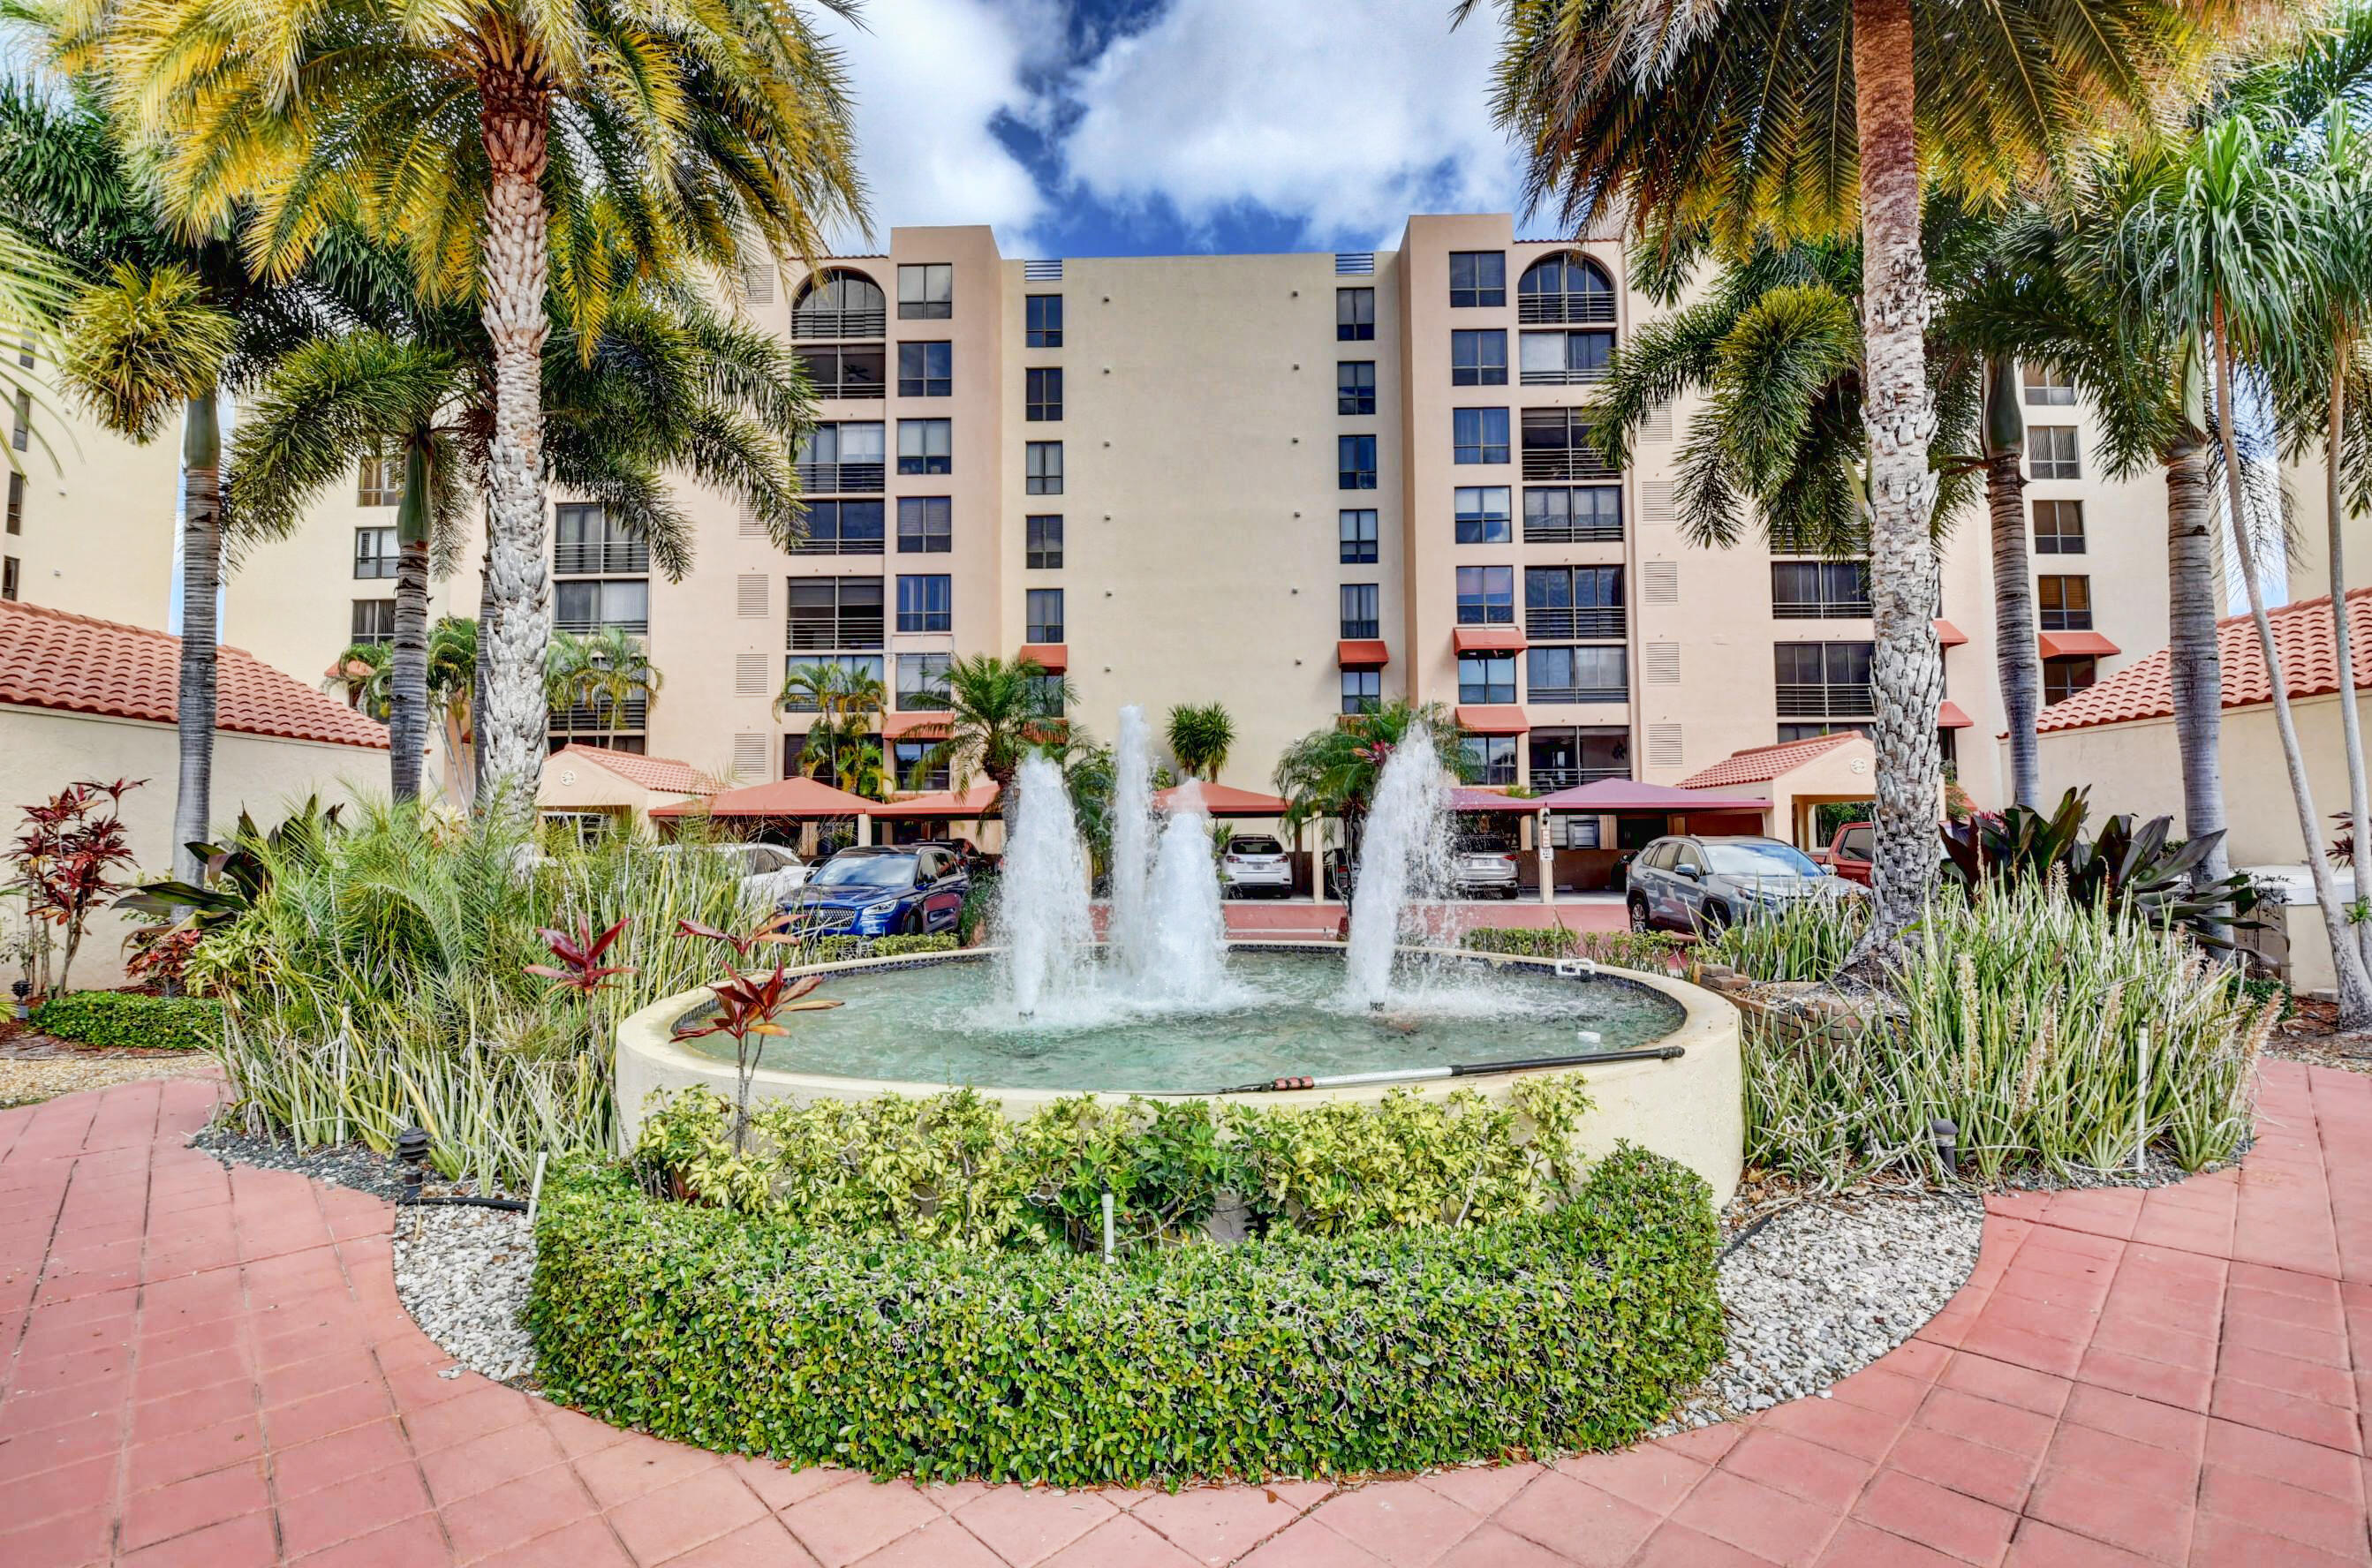 a view of a tall building with a fountain and a lawn chair under palm trees